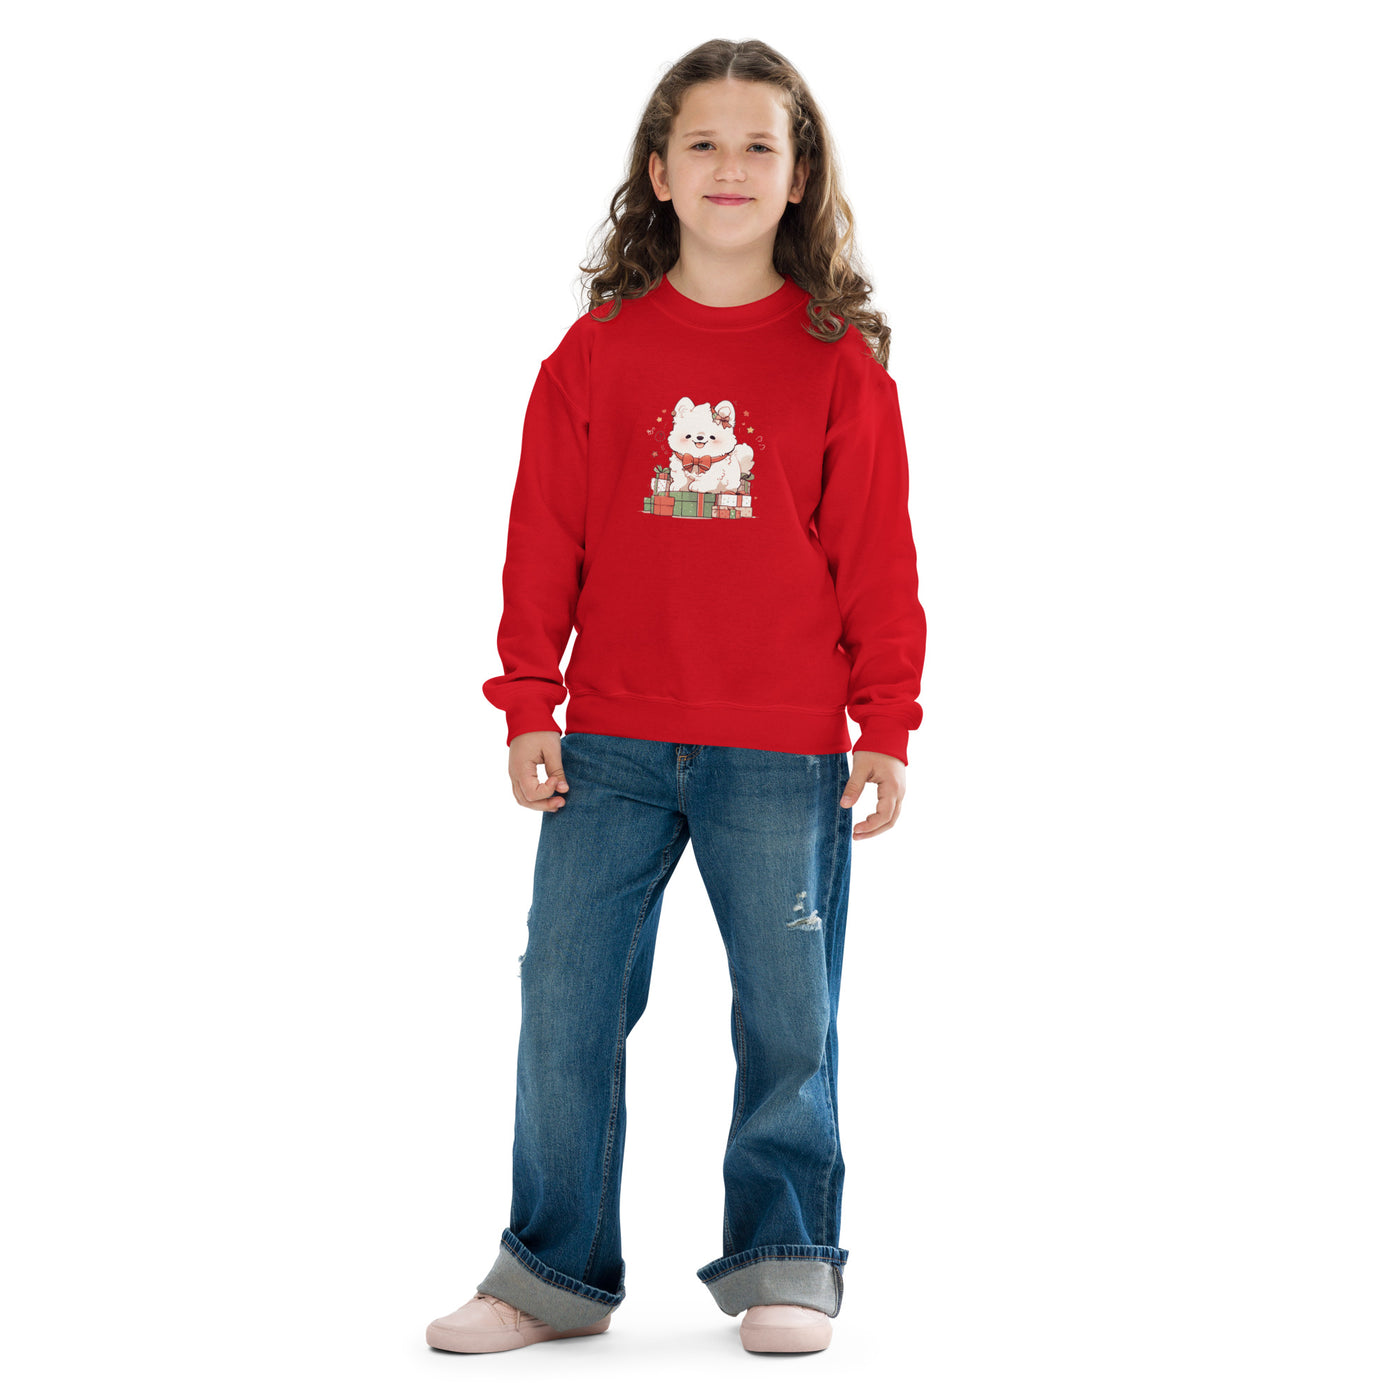 Dog Youth crewneck sweatshirtXS-XL Unisex - Coco Potato - dresses and partywear for little girls